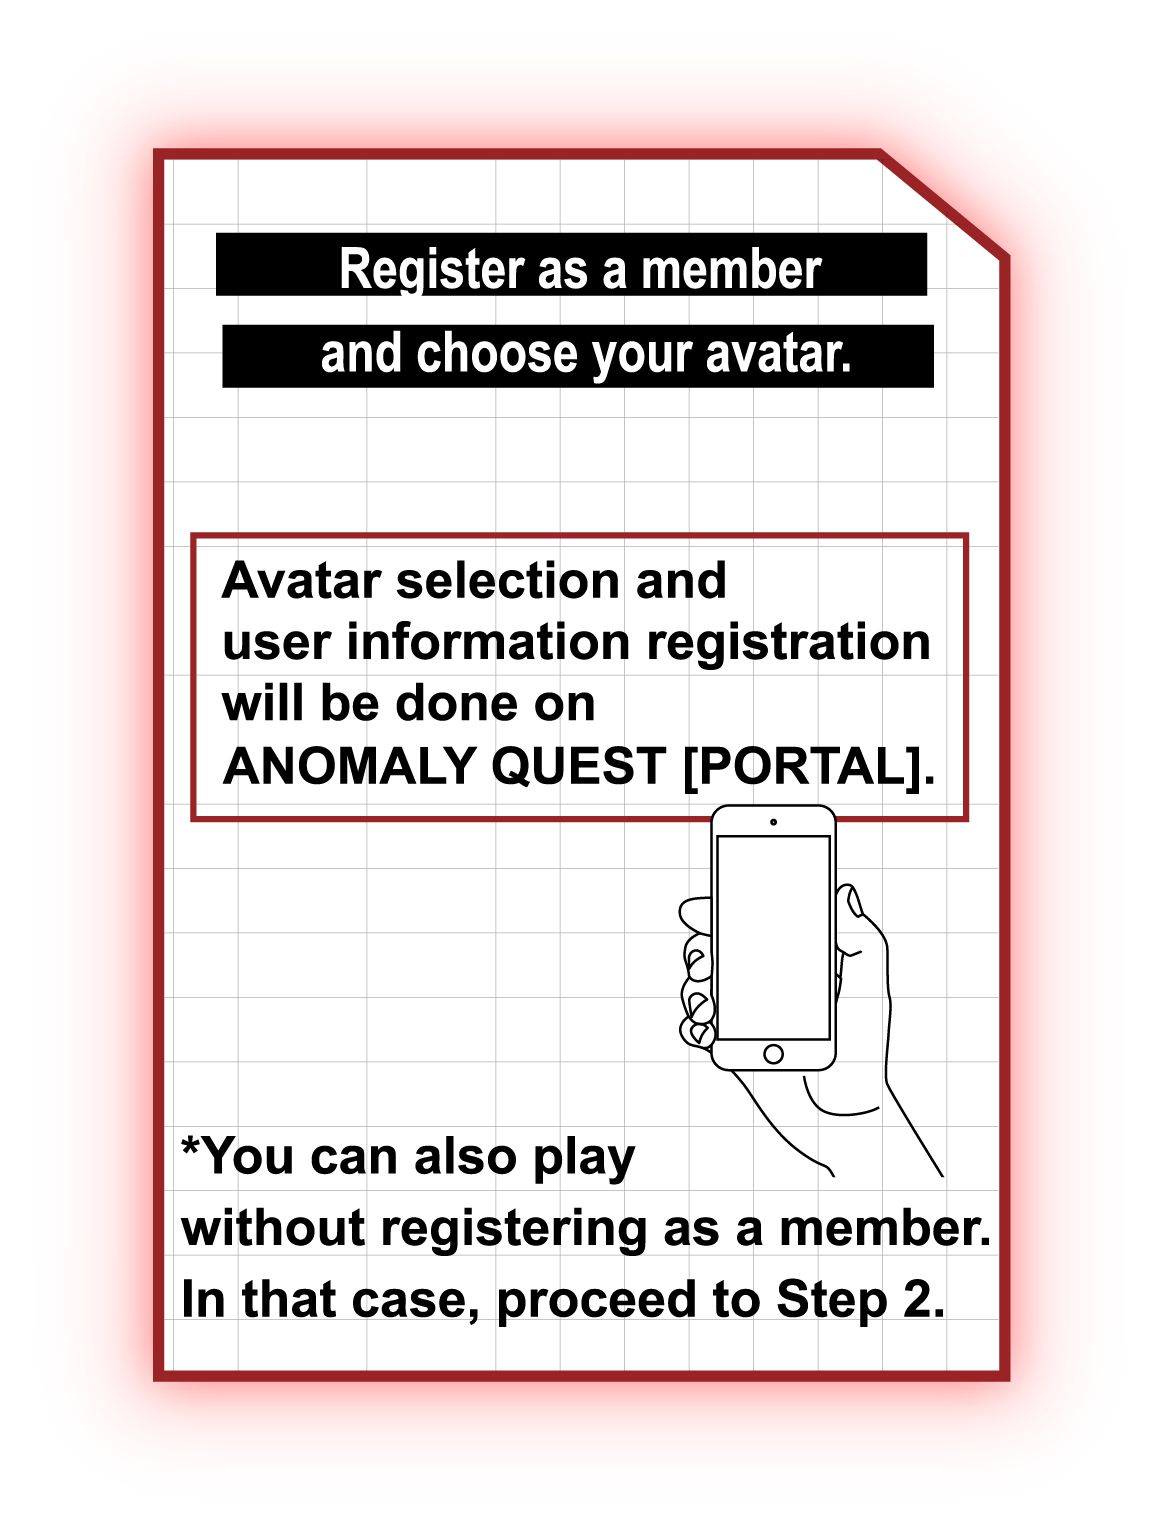 Choose the desirable date and time make a reservation. *All players are required to register for the participation of the game. Game reservations would be done through ANOMALY QUEST [PORTAL].